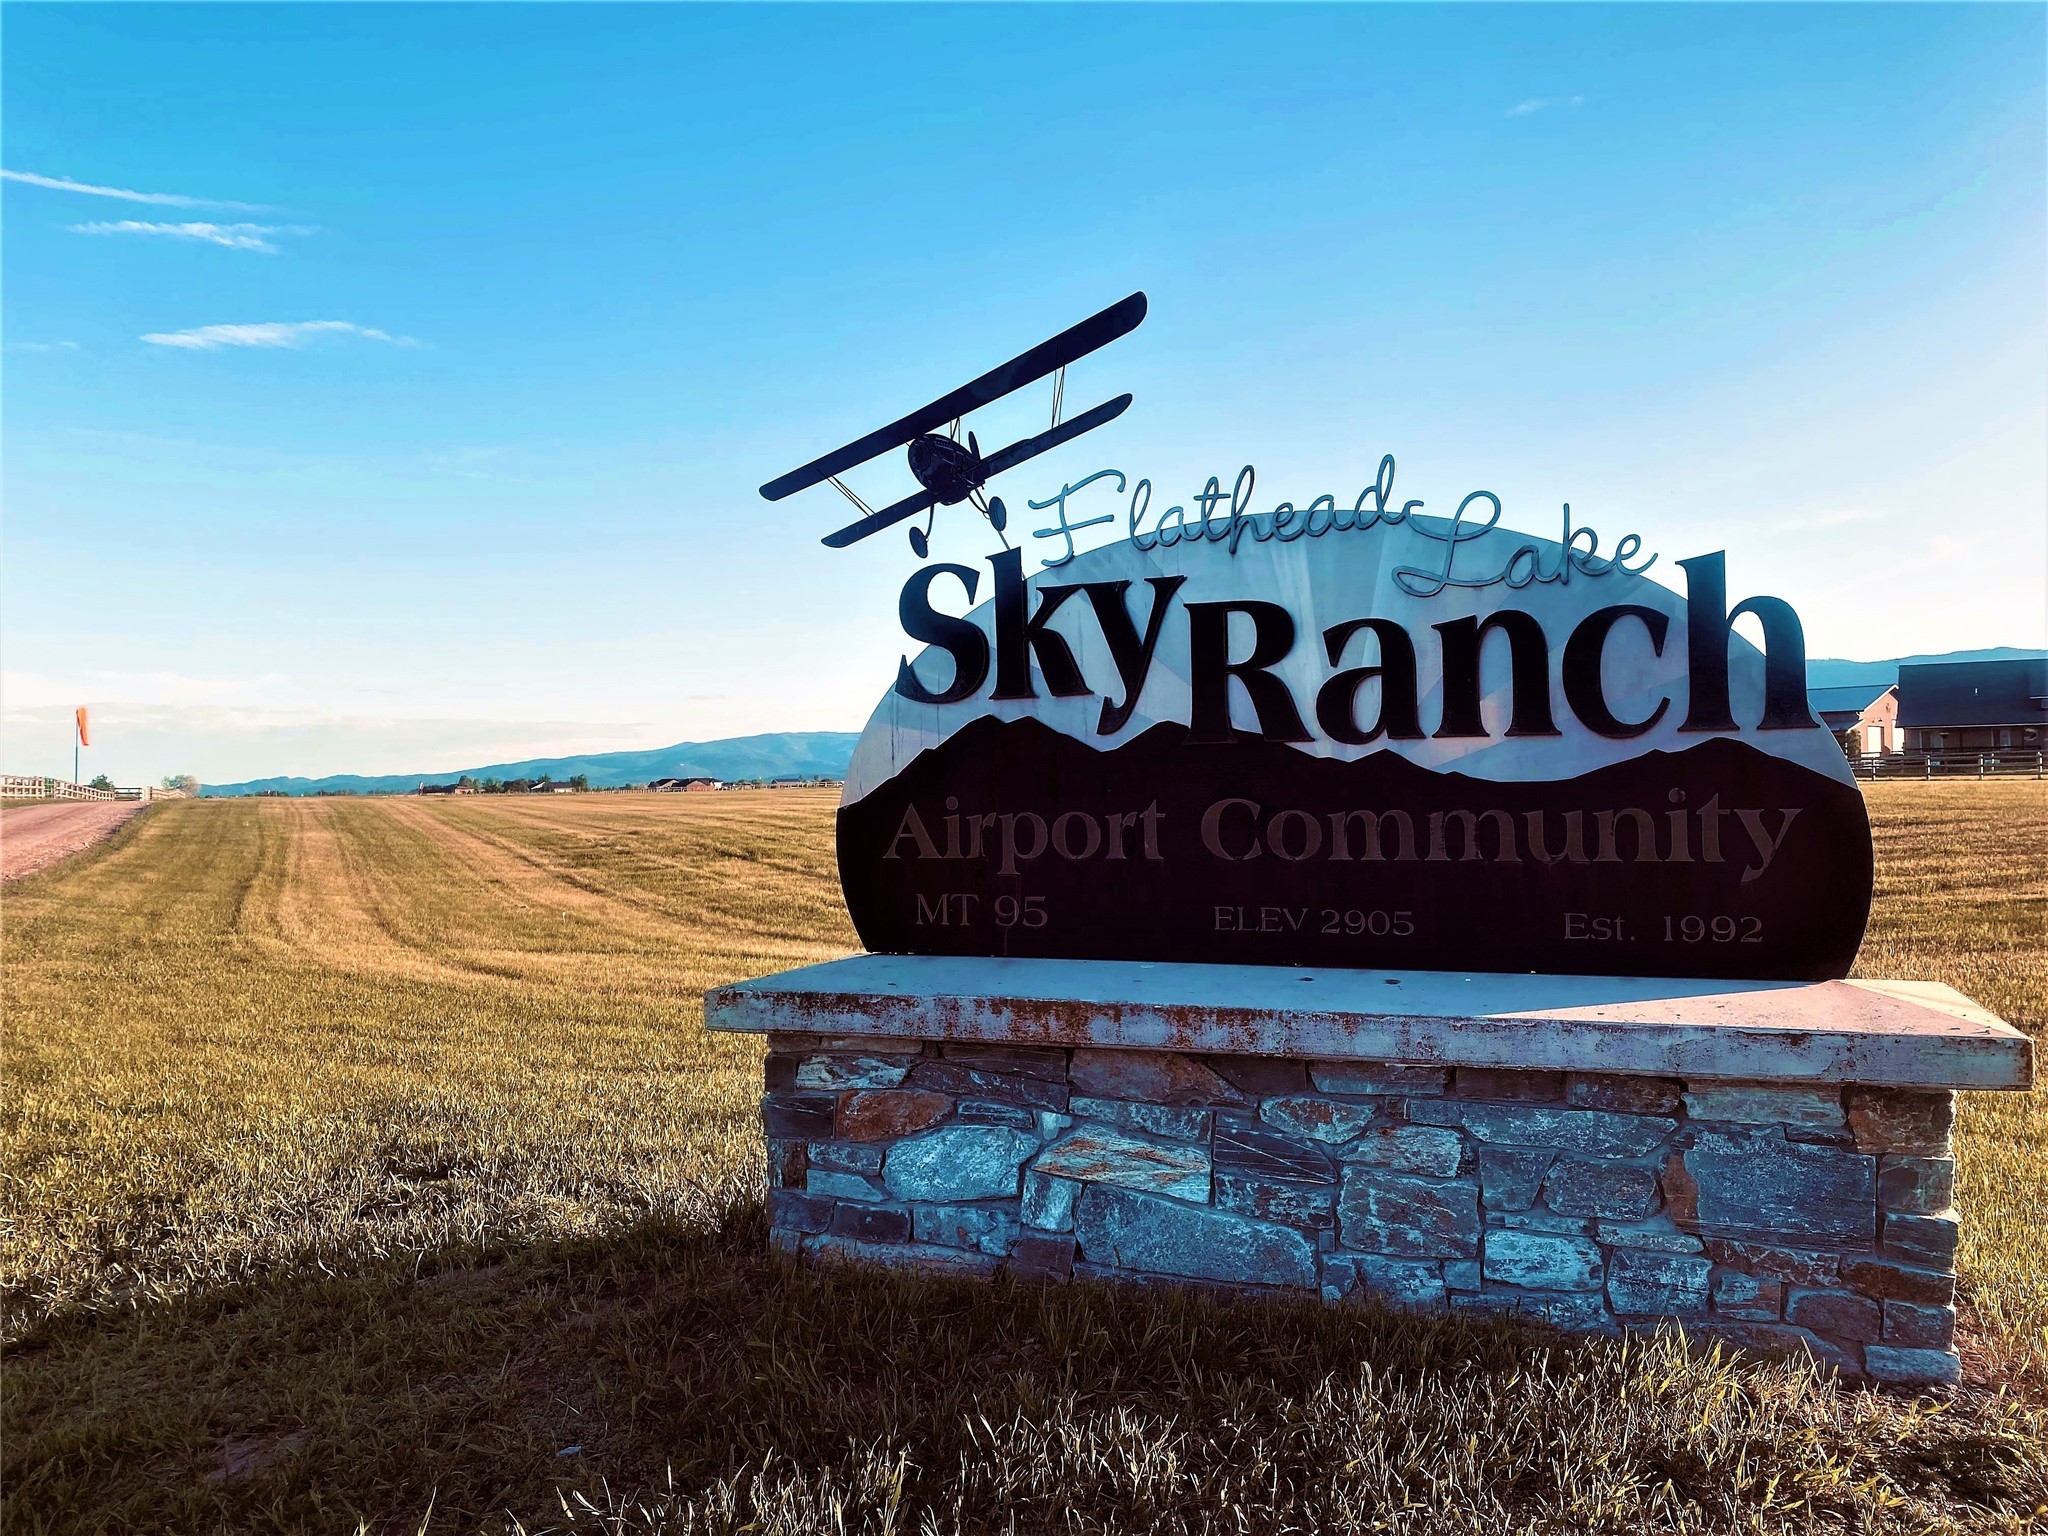 Fantastic soft field airstrip lot in the Sky Ranch neighborhood, Rotor Wing. This 5.03 acres has amazing 360° views of the Swan and Blacktail Mountain ranges. Private Sky Ranch runway offers remarkable approach and take off north/south over Flathead Lake. Beautiful level ground is perfect for your fly-in dream come true home, with breathtaking views and very convenient location! This would also be a great horse property, with clean and green acreage. Runway is 5000x120 feet/1524x37 meters with non-standard runway edge lights. Lower Valley is a short and convenient drive to Bigfork (10 minutes), Kalispell (20 minutes), Somers, Lakeside (10 minutes). Glacier International Airport is about 35 minutes' drive, and Glacier National Park is about an hour. Come enjoy all that northwest Montana has to offer, from the best recreation areas and wildlife, stunning big skies for flying, and a lovely neighborhood with fellow enthusiasts. Welcome to the Flathead Valley, renowned for its beauty and recreation!  Flathead Lake is just a short drive away from the Sky Ranch neighborhood, and is the largest freshwater lake west of the Mississippi.  This lake is a marvel, with crystal clear waters and incredible recreation opportunities, including great fishing. Nearby is the Jewel Basin Recreation Area, with year-round outdoor fun!  Great hiking, cross-country skiing, snowmobiling, horseback riding, and a fantastic array of wildlife viewing- these are just a few of the opportunities for a healthy lifestyle that never gets old.  The Eagle Bend Golf Course is about ten minutes away, and is a lovely Jack Nicholas 18 hole course. There's so much to do and see here in the Flathead Valley; it's a wonderful place to live, work, and play.